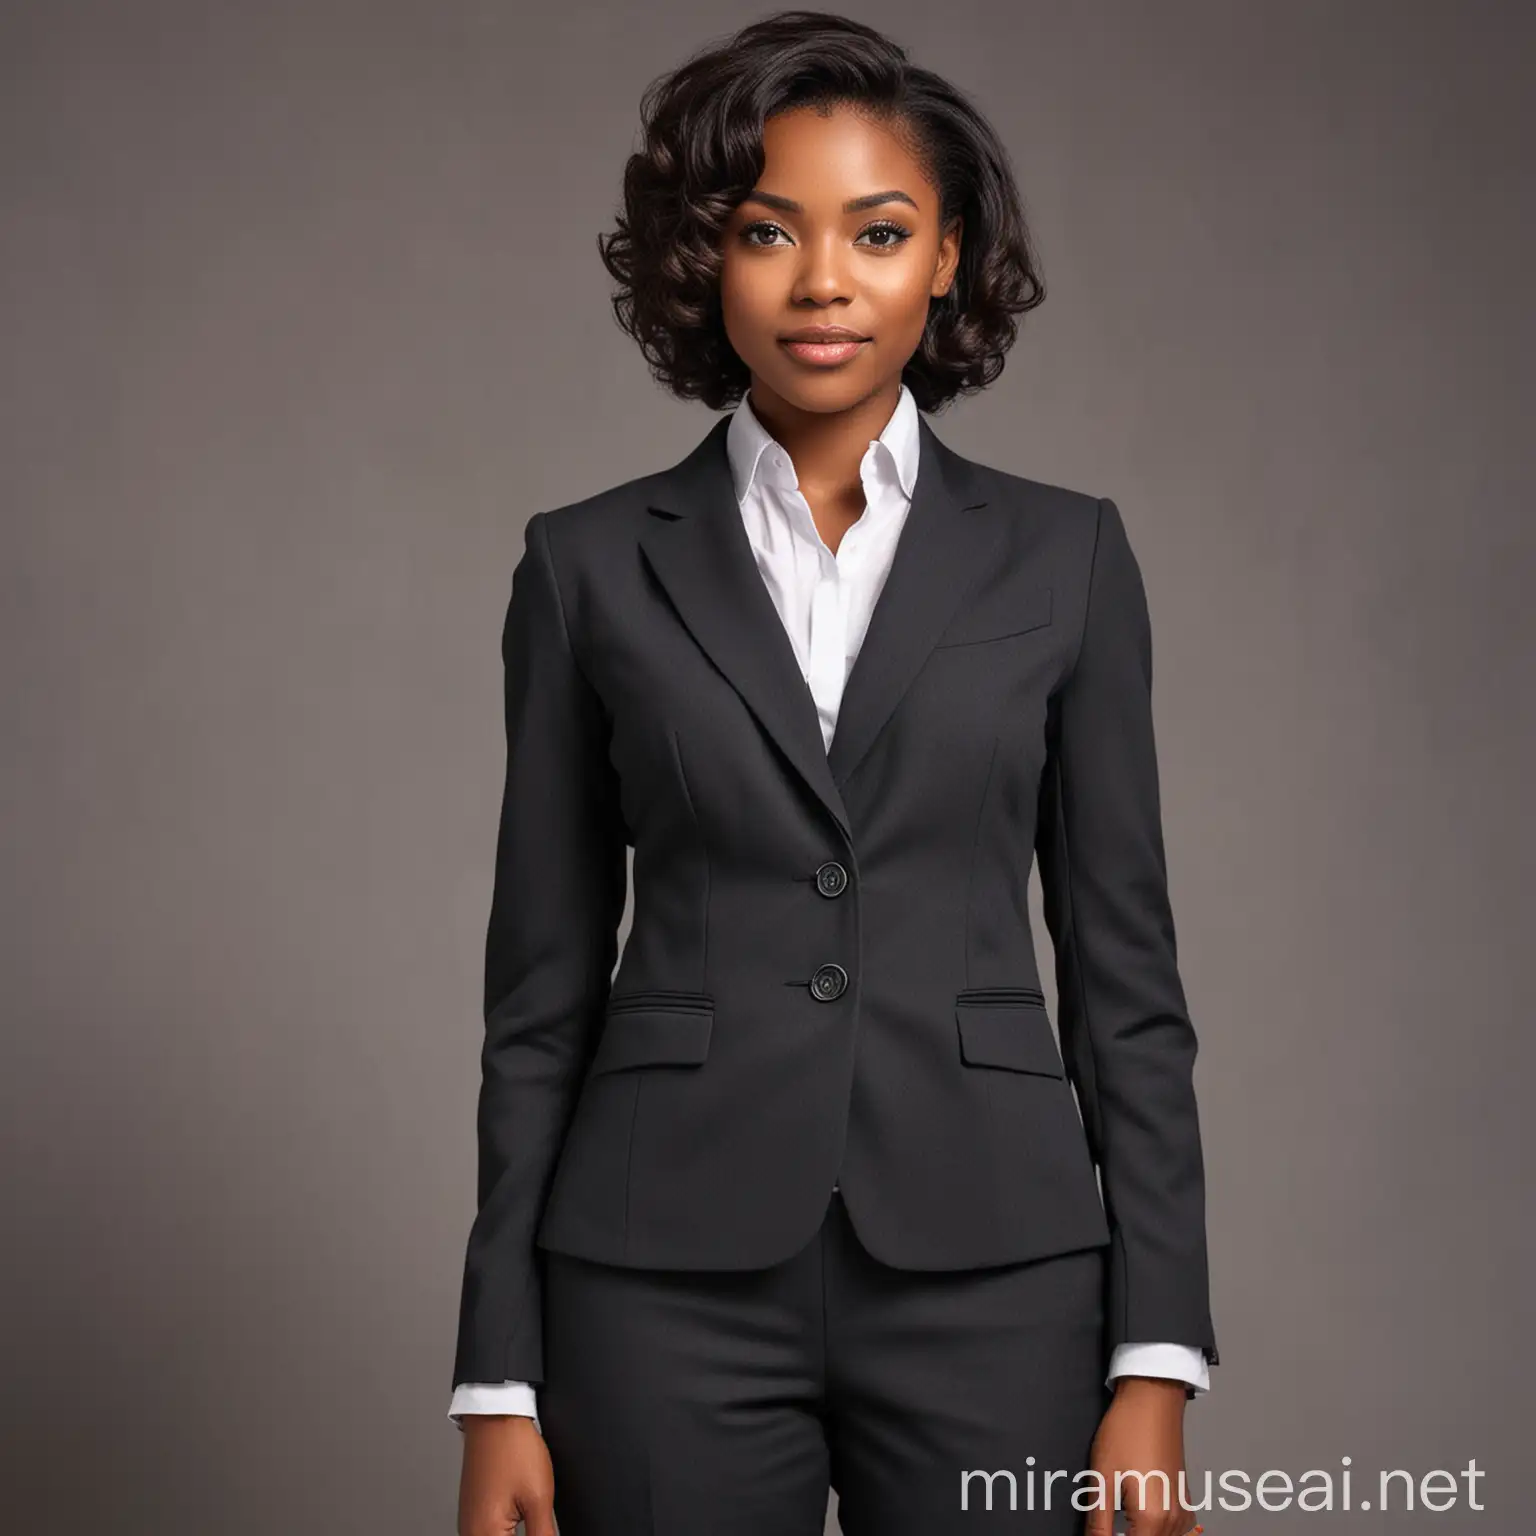 generate a photo of a professional black lady in suit